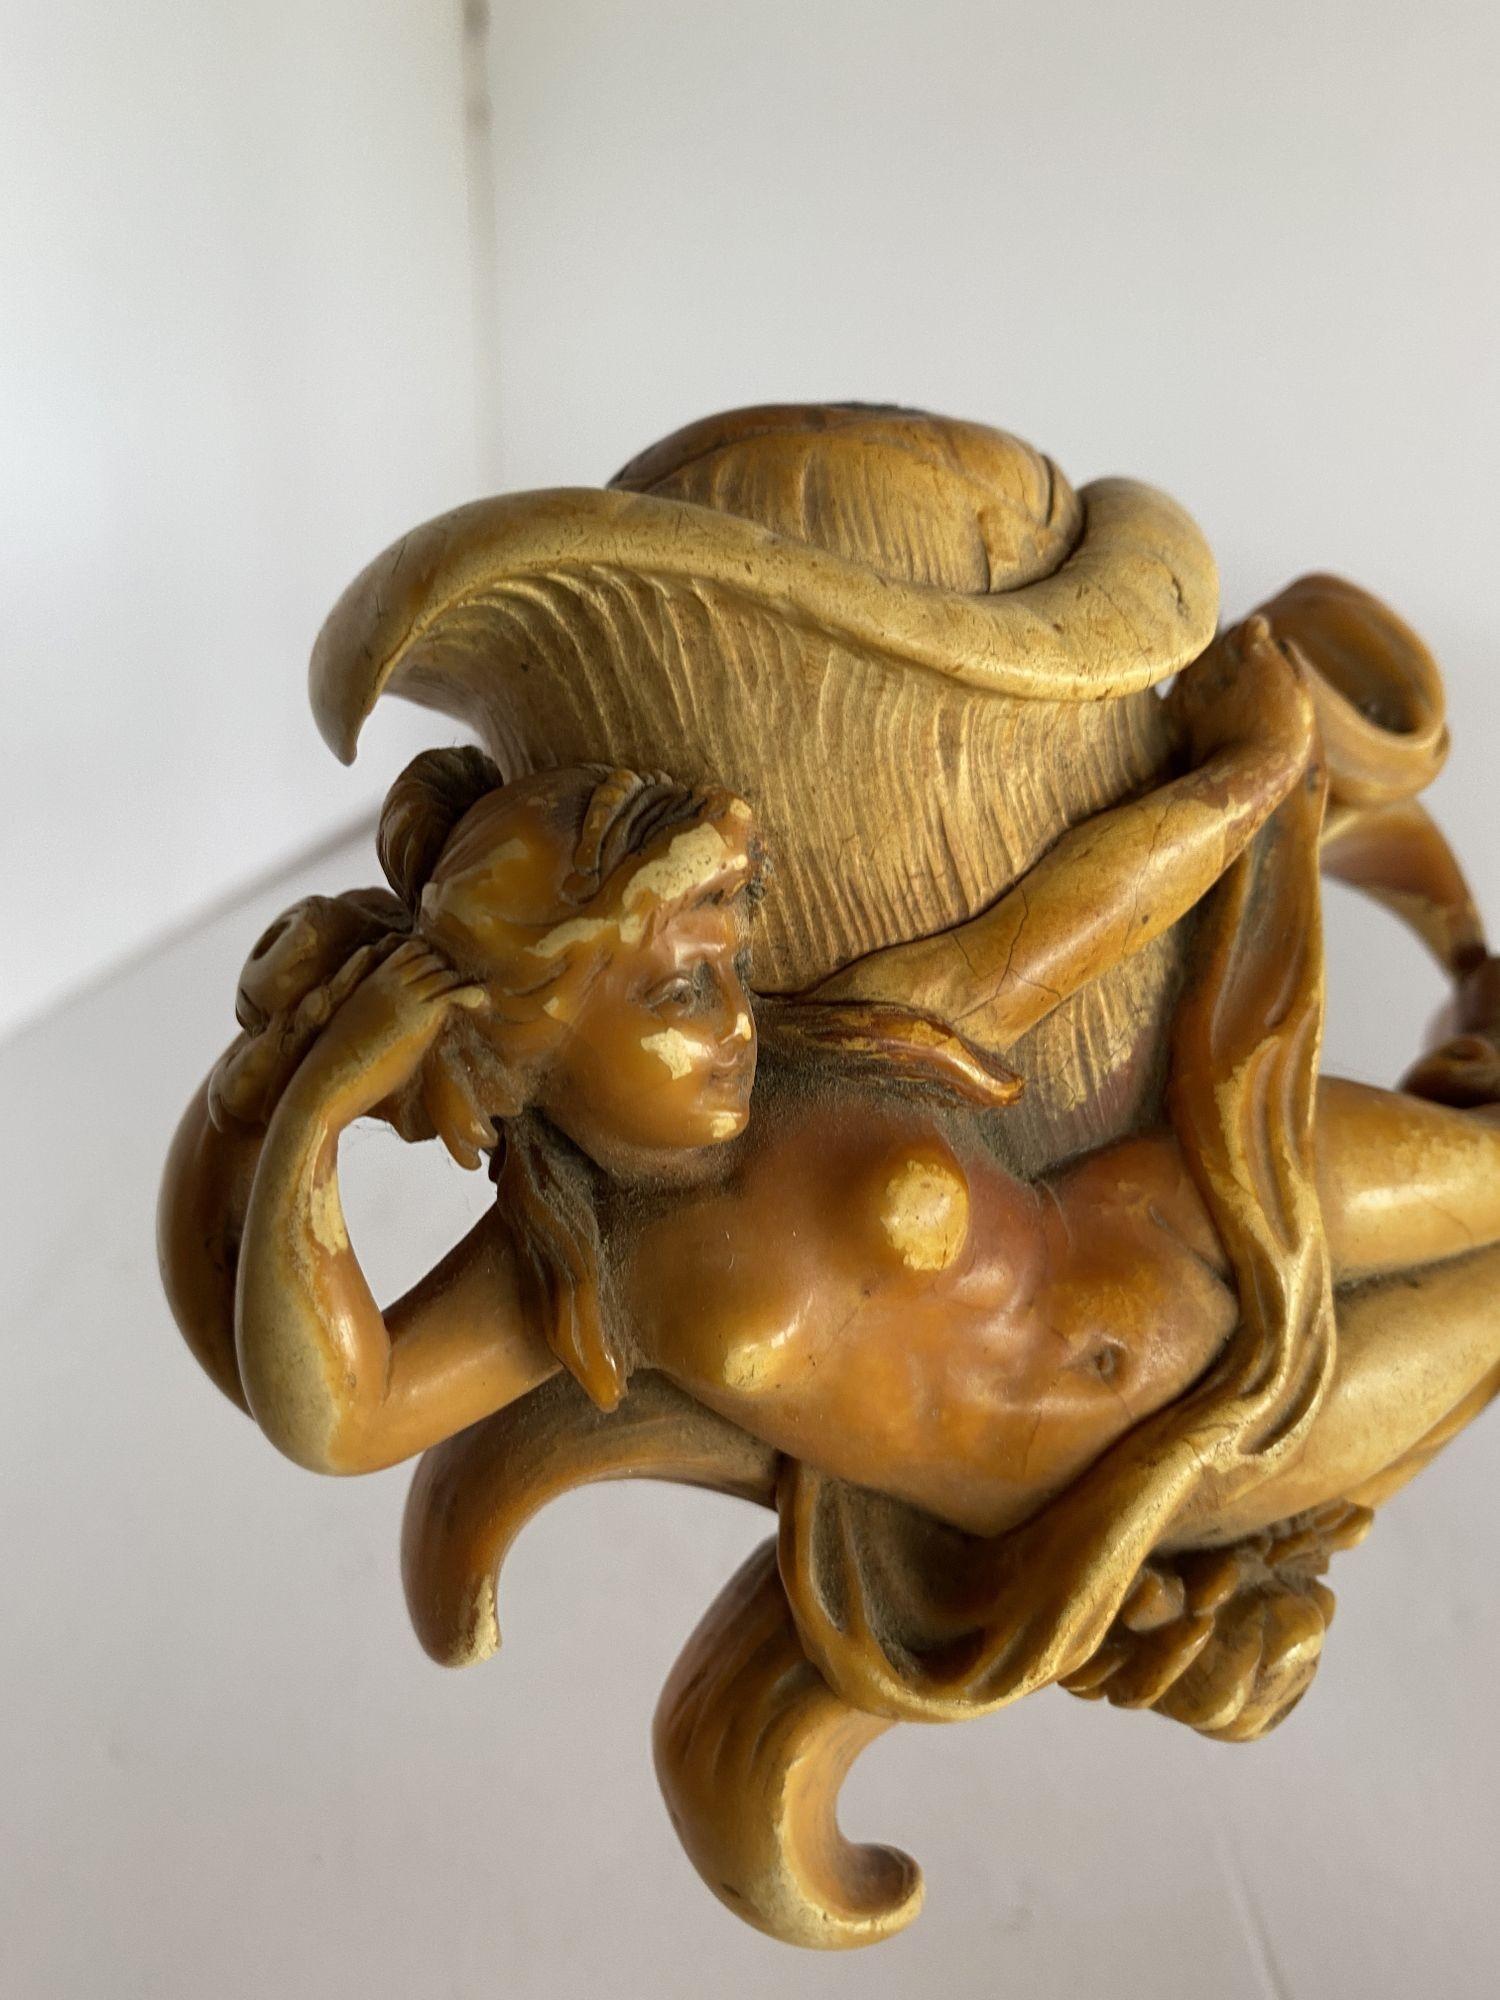 Rare carved hand nude goddess Meerschaum pipe in case.
 
Circa 1890.
 